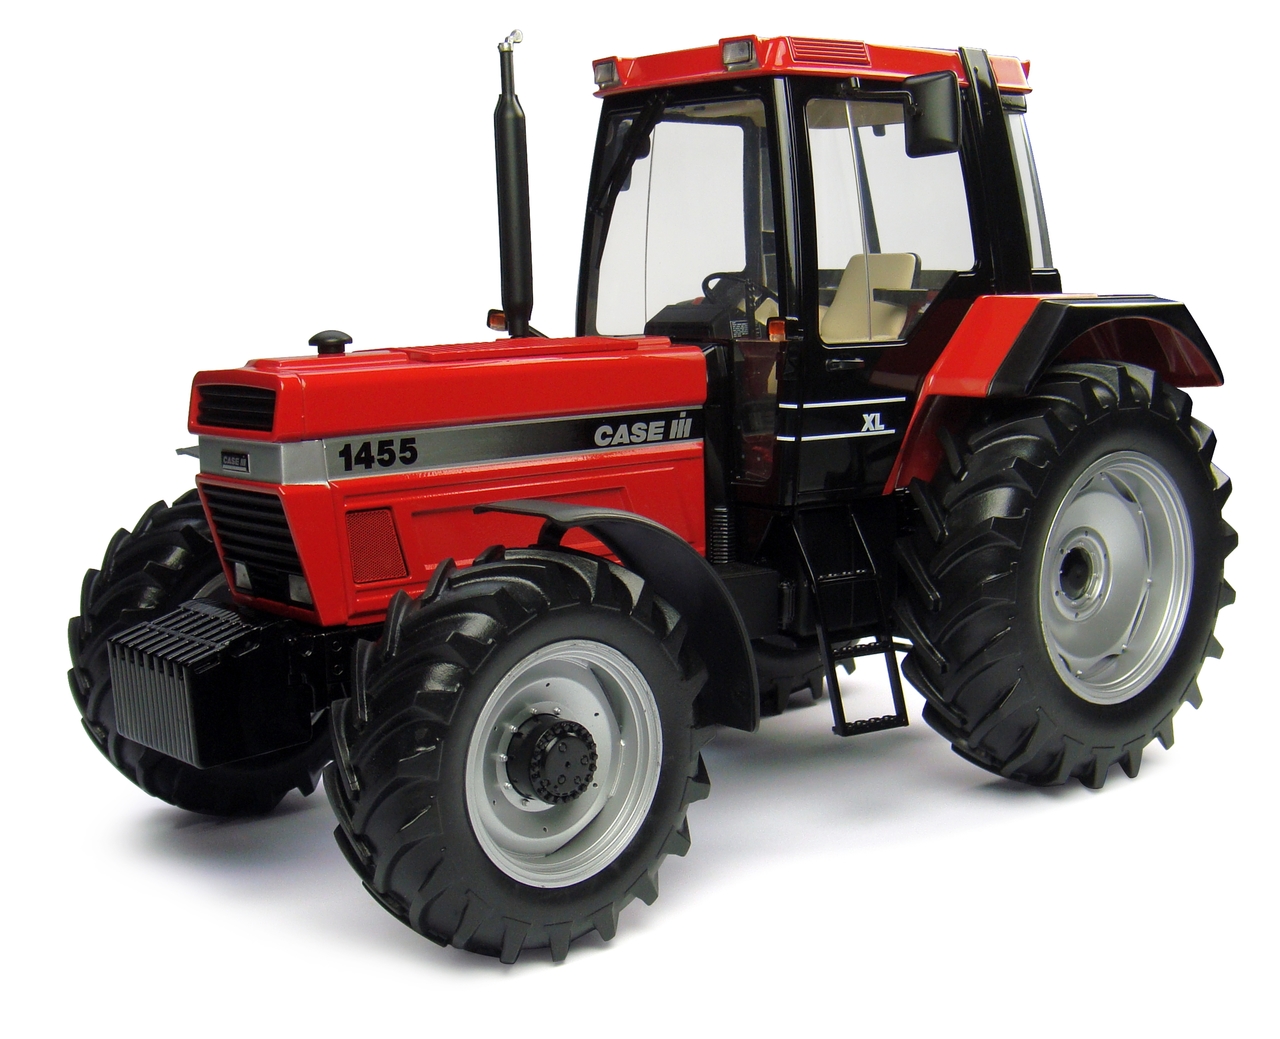 1996 Case Ih 1455xl Tractor (4th Generation) Limited Edition To 2000 Pieces Worldwide 1/16 Diecast Model By Universal Hobbies